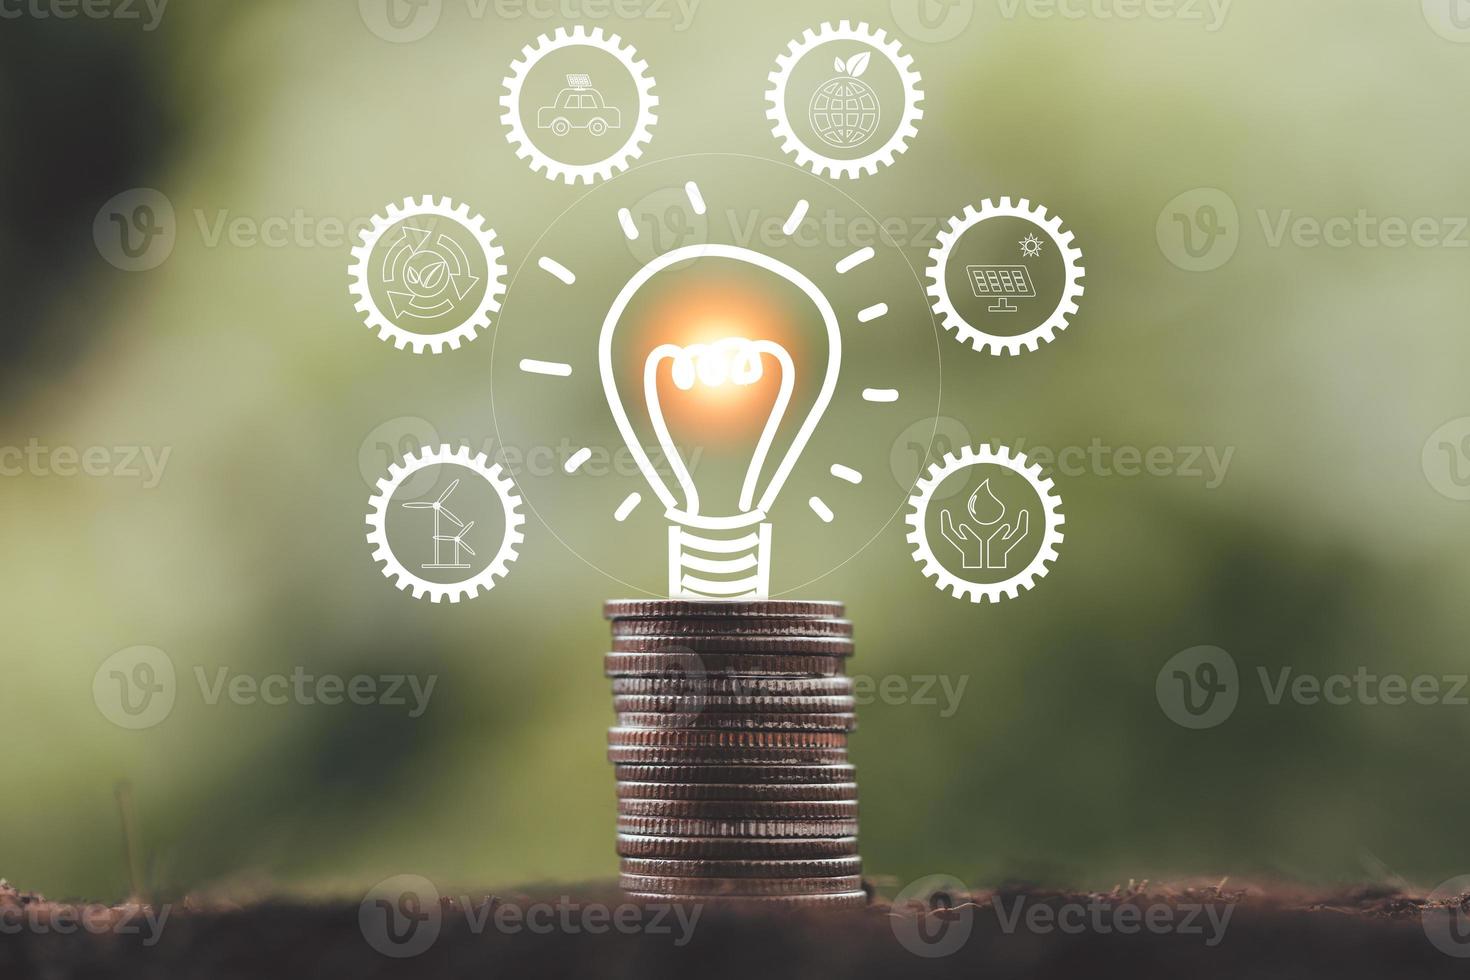 alternative energy, Renewable Energy, saving energy and finance, energy stock investment, lightbulb on coin with eco environment icon. electricity energy source for eco environment. photo